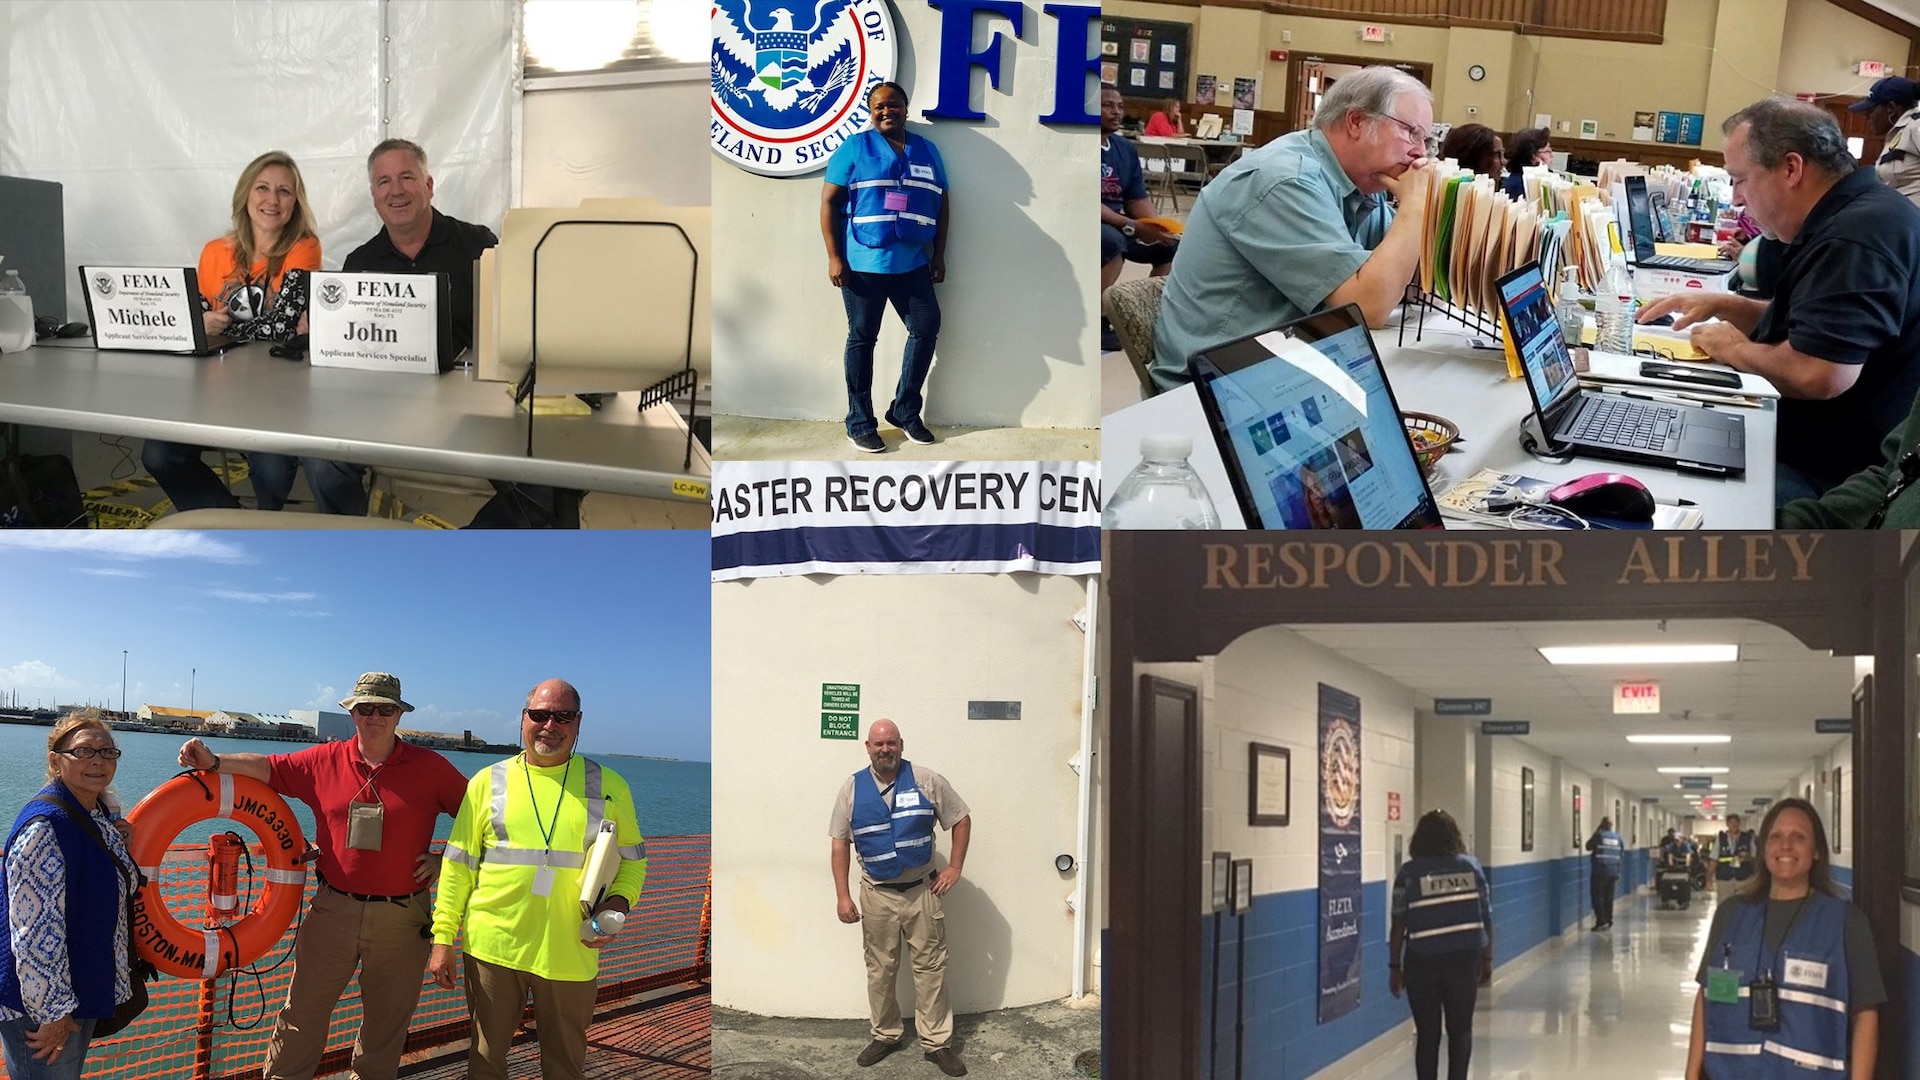 Over 300 Defense Contract Management Agency employees volunteered to deploy with the Federal Emergency Management Agency during relief efforts in the fall of 2017. Ten volunteers were selected and contributed 45 days of support in locations around the country and its territories. (DCMA graphic by Elizabeth Szoke)